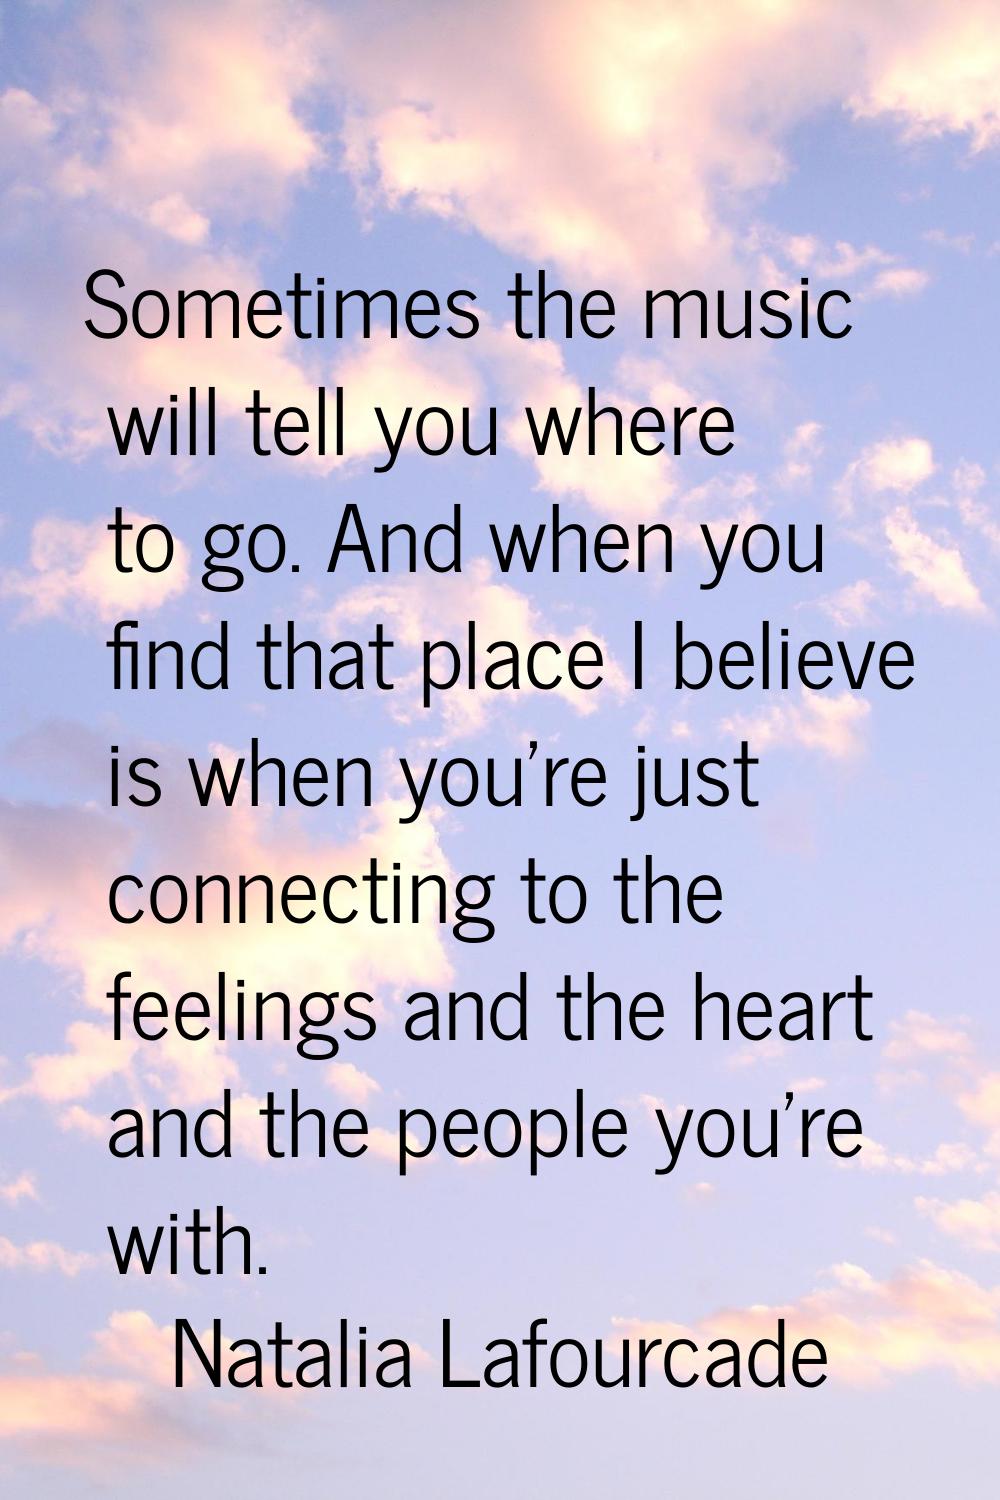 Sometimes the music will tell you where to go. And when you find that place I believe is when you'r